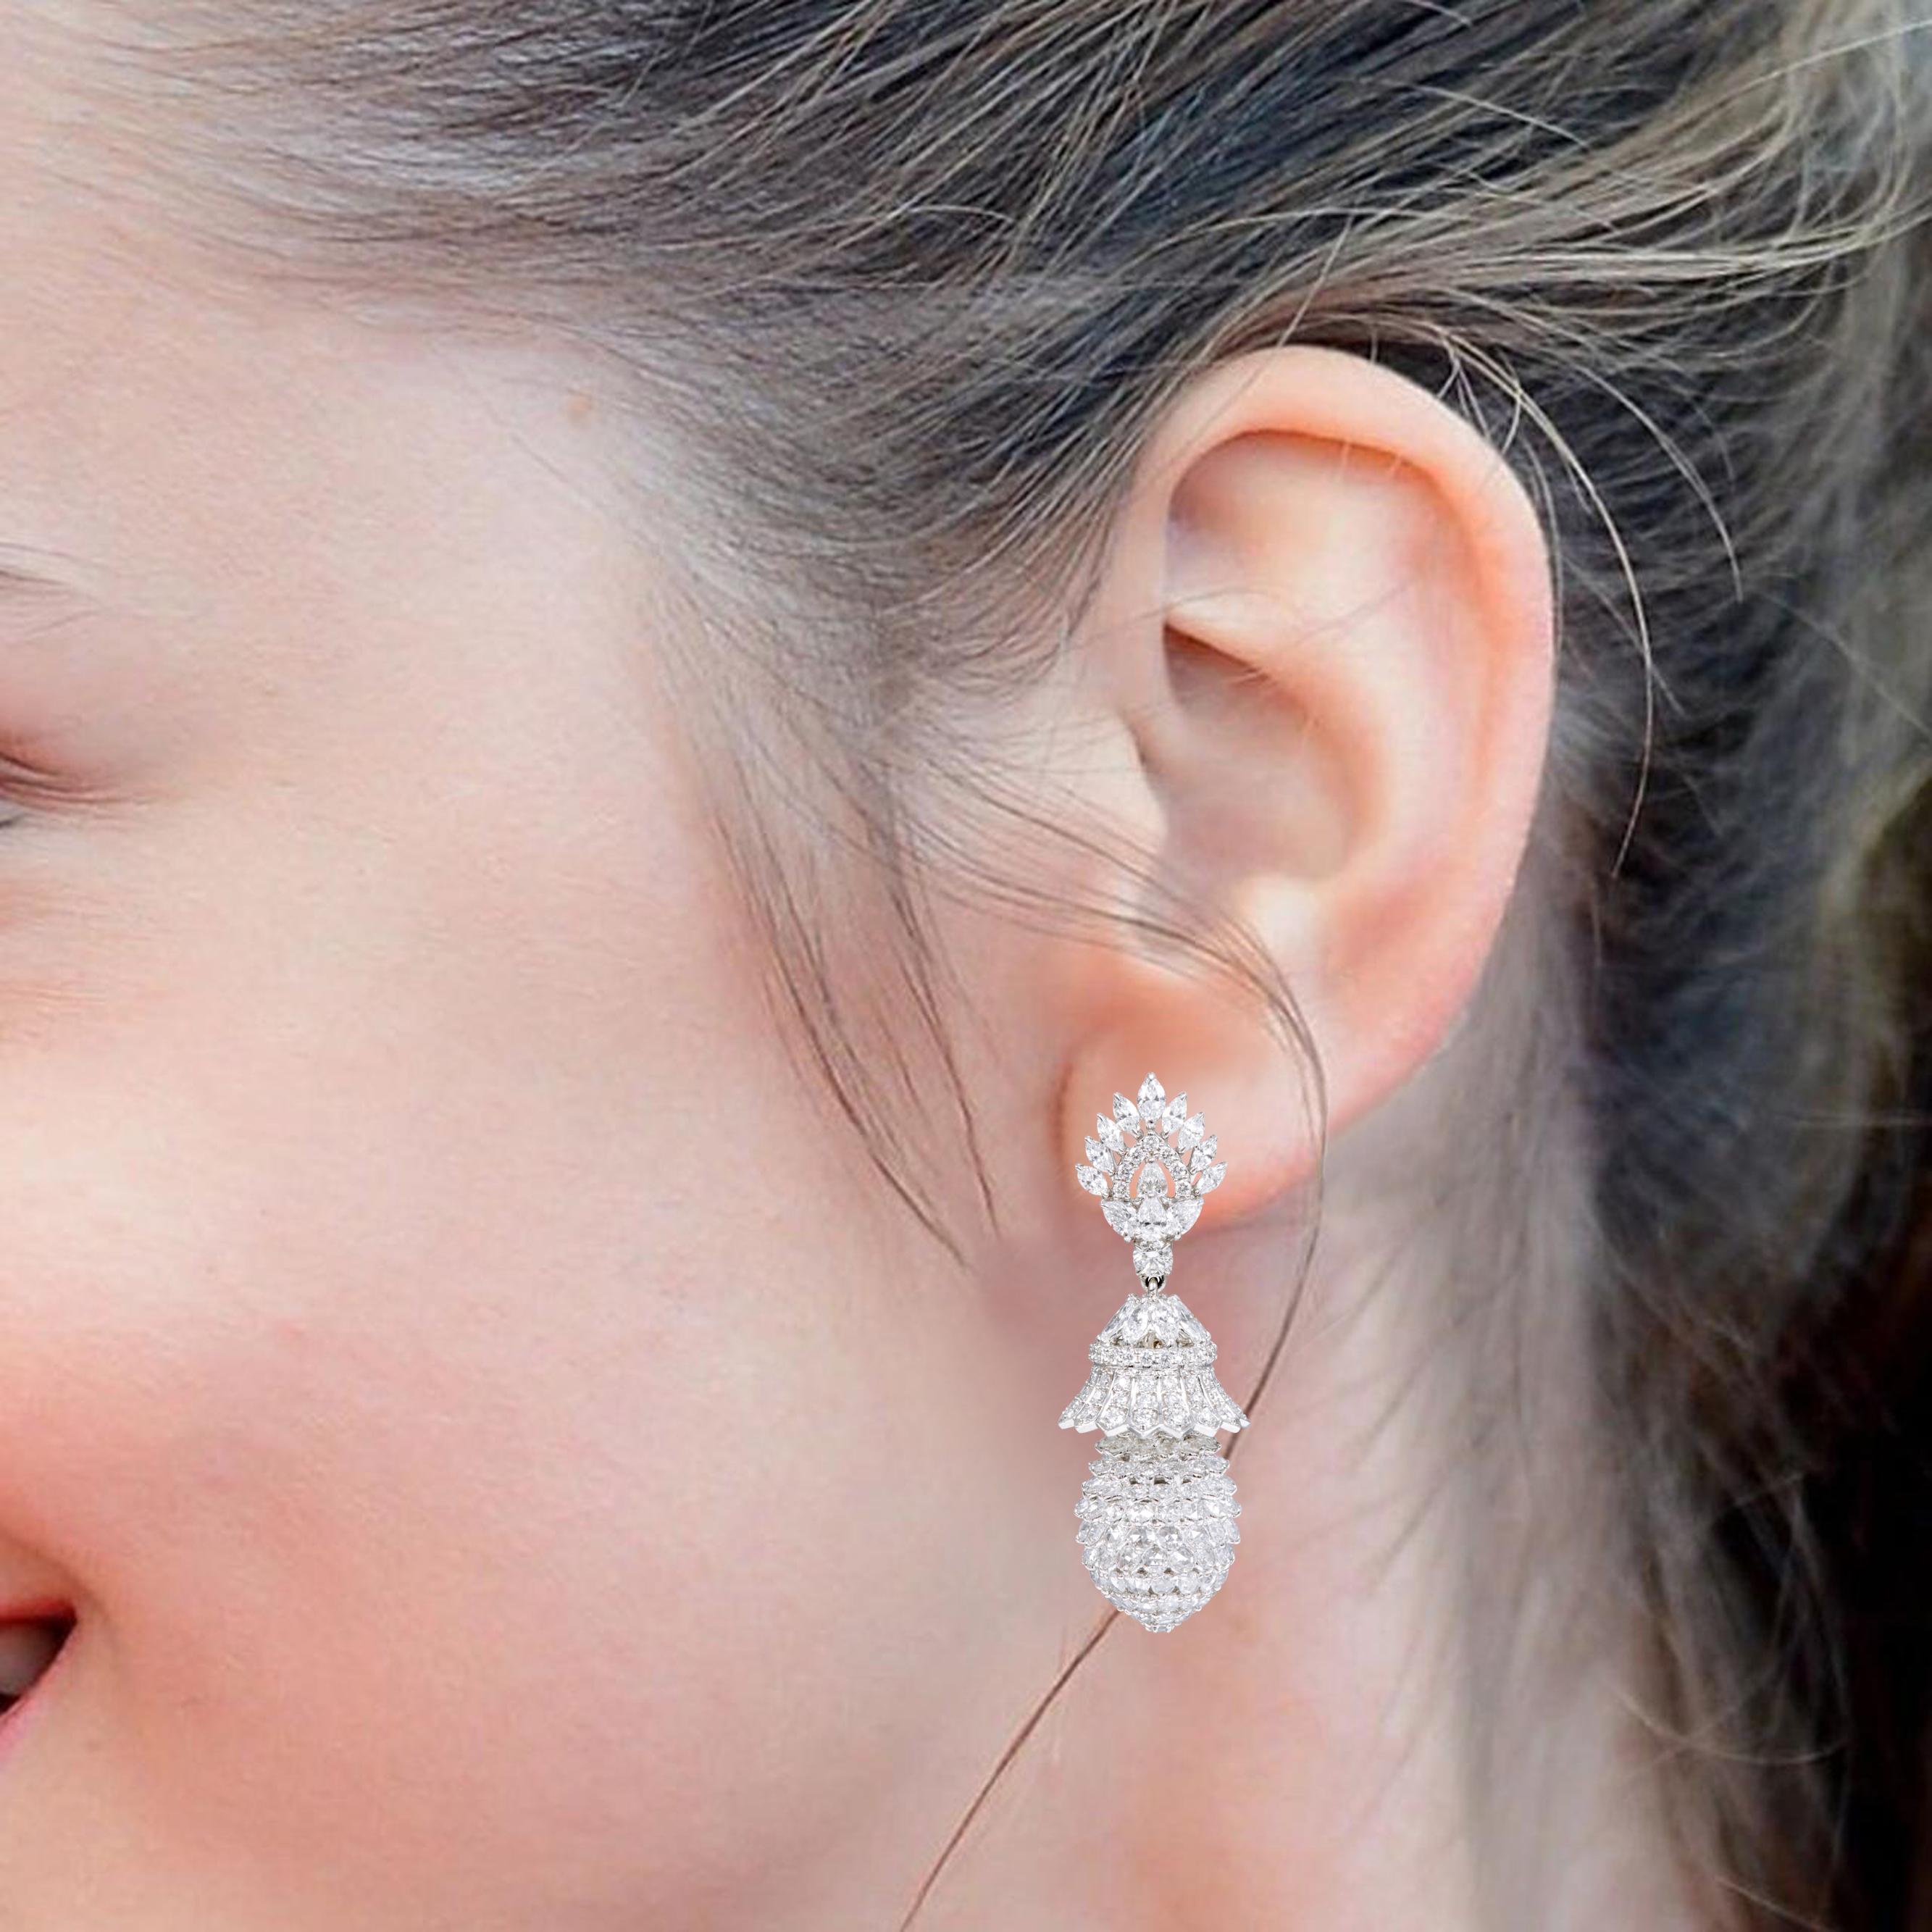 18 Karat White Gold 9.86 Carat Diamond Drop Cocktail Earrings

A design to leave you spellbound. You won’t be able to stop yourself from falling in love with this sensational pair of diamond drop earrings. These earrings takes it’s inspiration from